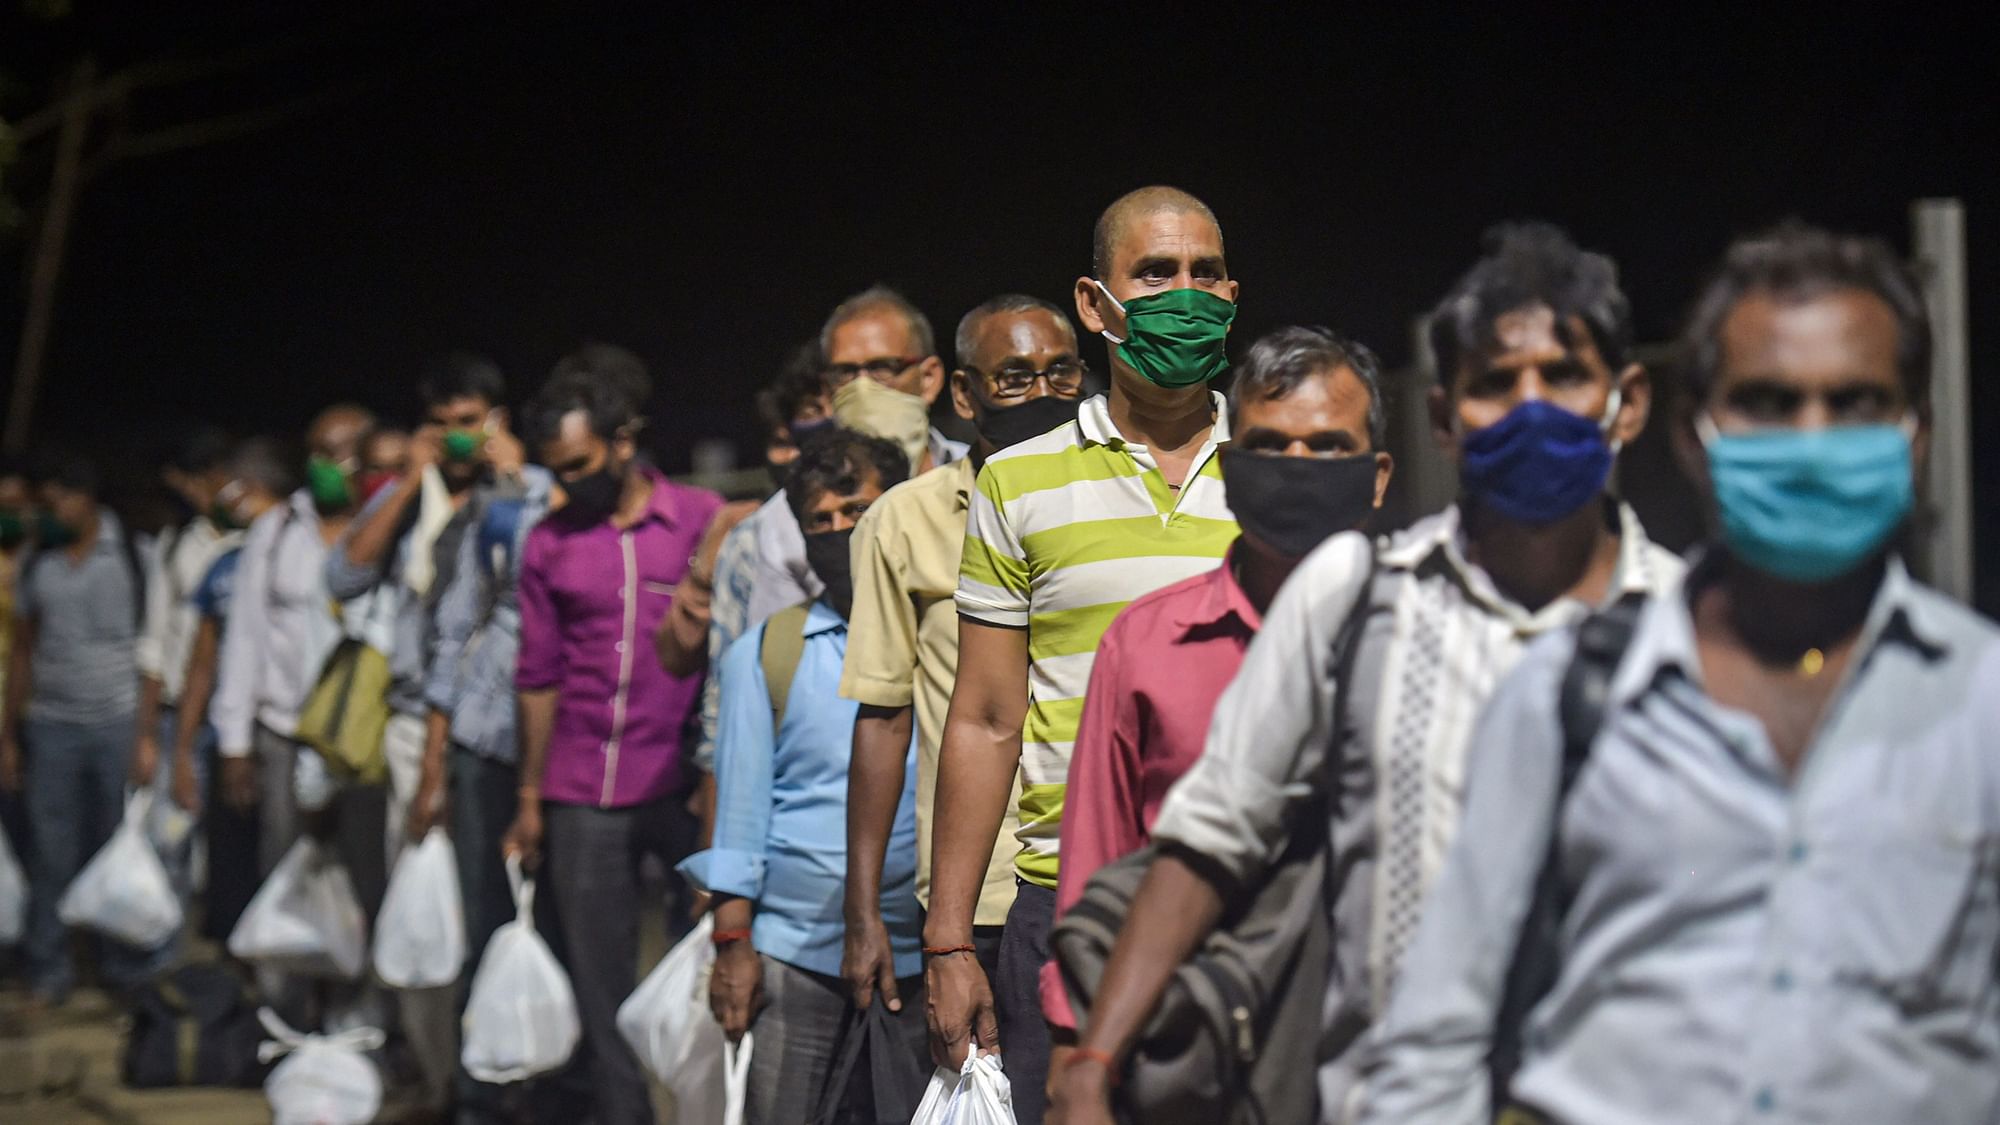  Migrants from various northern states of India wait to board a special train for Gorakhpur, during the ongoing COVID-19 lockdown, in Bhiwandi, Saturday, May 2, 2020.